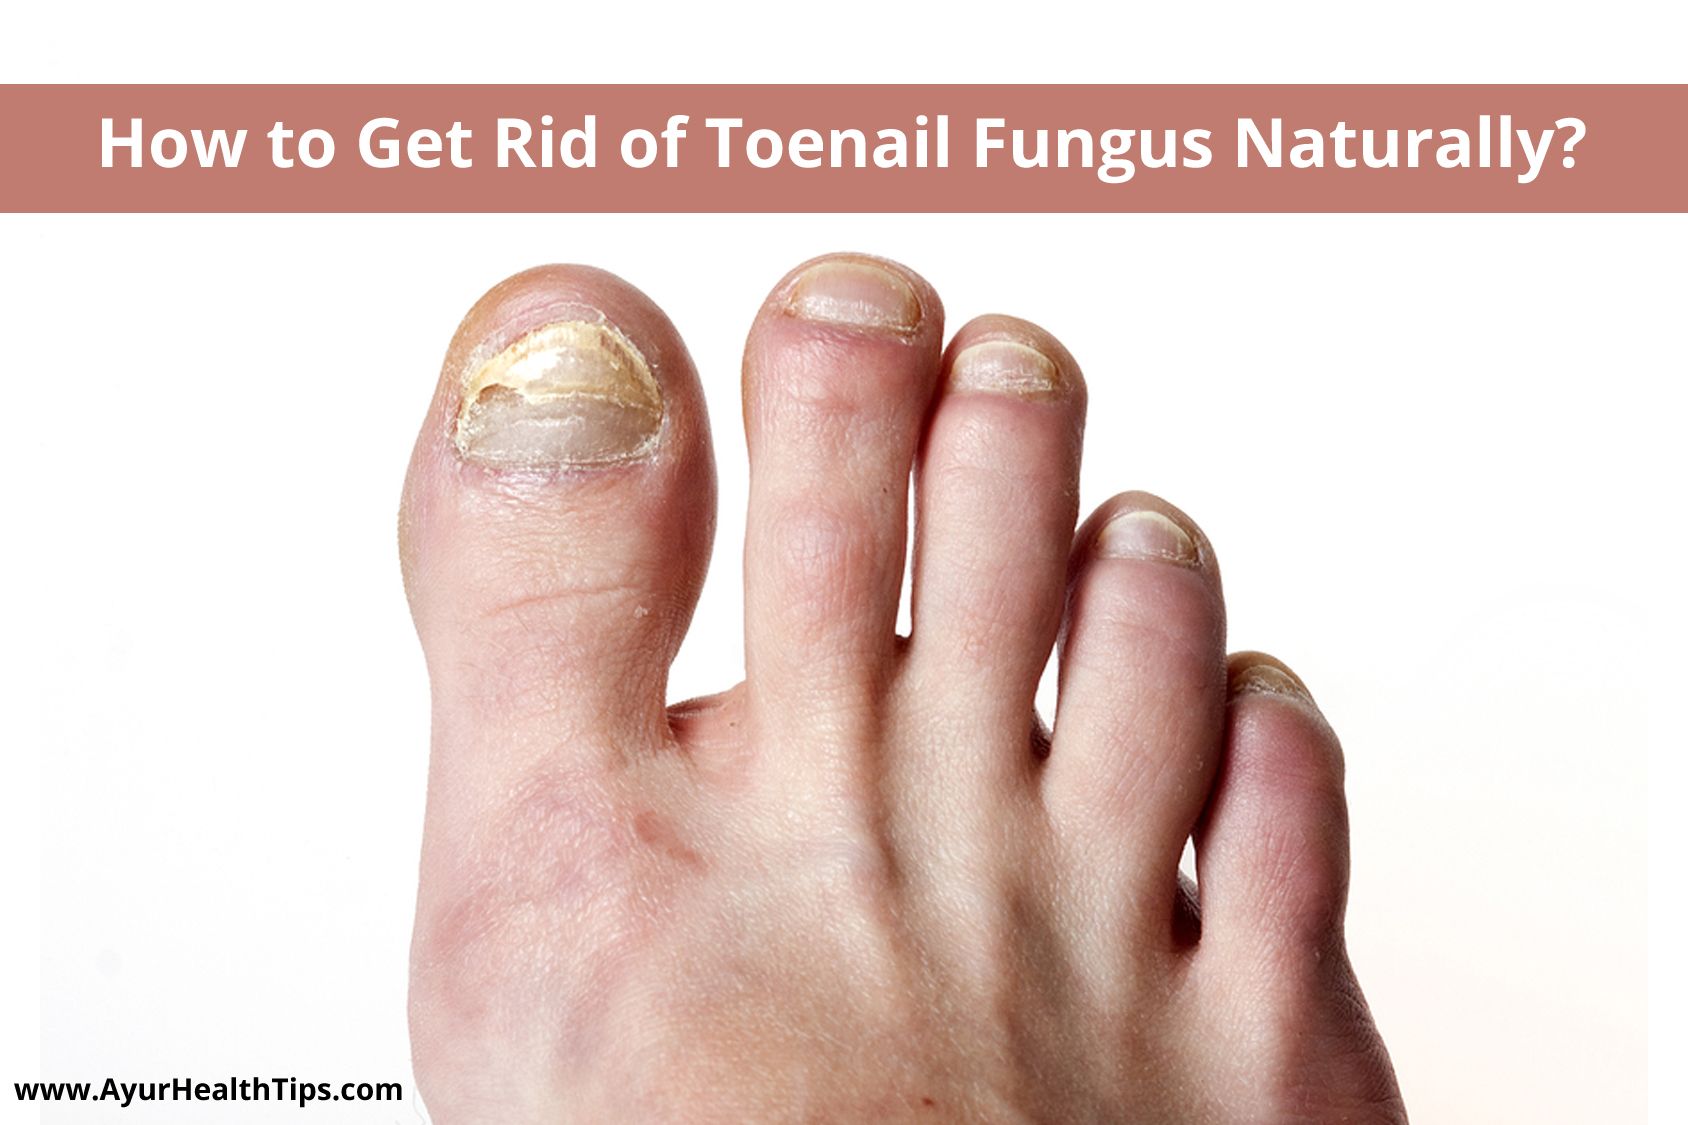 How To Get Rid Of Toenail Fungus Naturally â 8 Remedies ...